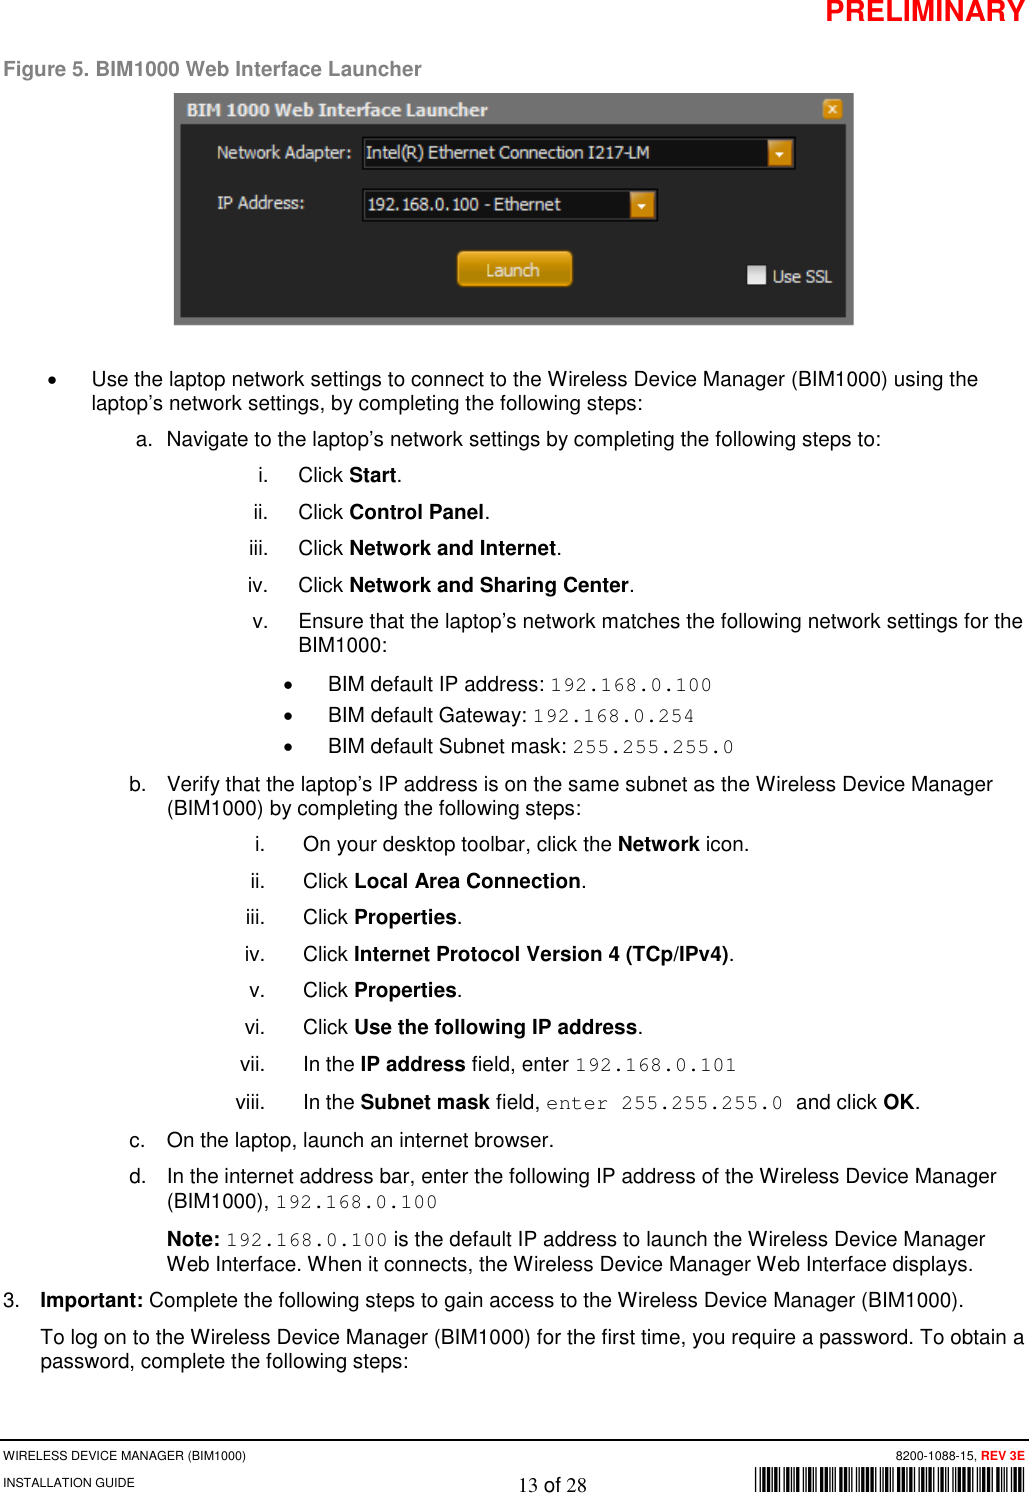 PRELIMINARY WIRELESS DEVICE MANAGER (BIM1000)      8200-1088-15, REV 3E INSTALLATION GUIDE    13 of 28        *8200-1088-15* Figure 5. BIM1000 Web Interface Launcher  • Use the laptop network settings to connect to the Wireless Device Manager (BIM1000) using the laptop’s network settings, by completing the following steps: a.  Navigate to the laptop’s network settings by completing the following steps to: i. Click Start. ii. Click Control Panel. iii. Click Network and Internet. iv. Click Network and Sharing Center. v. Ensure that the laptop’s network matches the following network settings for the BIM1000: • BIM default IP address: 192.168.0.100 • BIM default Gateway: 192.168.0.254 • BIM default Subnet mask: 255.255.255.0 b.  Verify that the laptop’s IP address is on the same subnet as the Wireless Device Manager (BIM1000) by completing the following steps: i.  On your desktop toolbar, click the Network icon. ii. Click Local Area Connection. iii. Click Properties. iv. Click Internet Protocol Version 4 (TCp/IPv4). v. Click Properties. vi. Click Use the following IP address. vii. In the IP address field, enter 192.168.0.101 viii. In the Subnet mask field, enter 255.255.255.0 and click OK. c. On the laptop, launch an internet browser. d. In the internet address bar, enter the following IP address of the Wireless Device Manager (BIM1000), 192.168.0.100 Note: 192.168.0.100 is the default IP address to launch the Wireless Device Manager Web Interface. When it connects, the Wireless Device Manager Web Interface displays. 3. Important: Complete the following steps to gain access to the Wireless Device Manager (BIM1000). To log on to the Wireless Device Manager (BIM1000) for the first time, you require a password. To obtain a password, complete the following steps: 